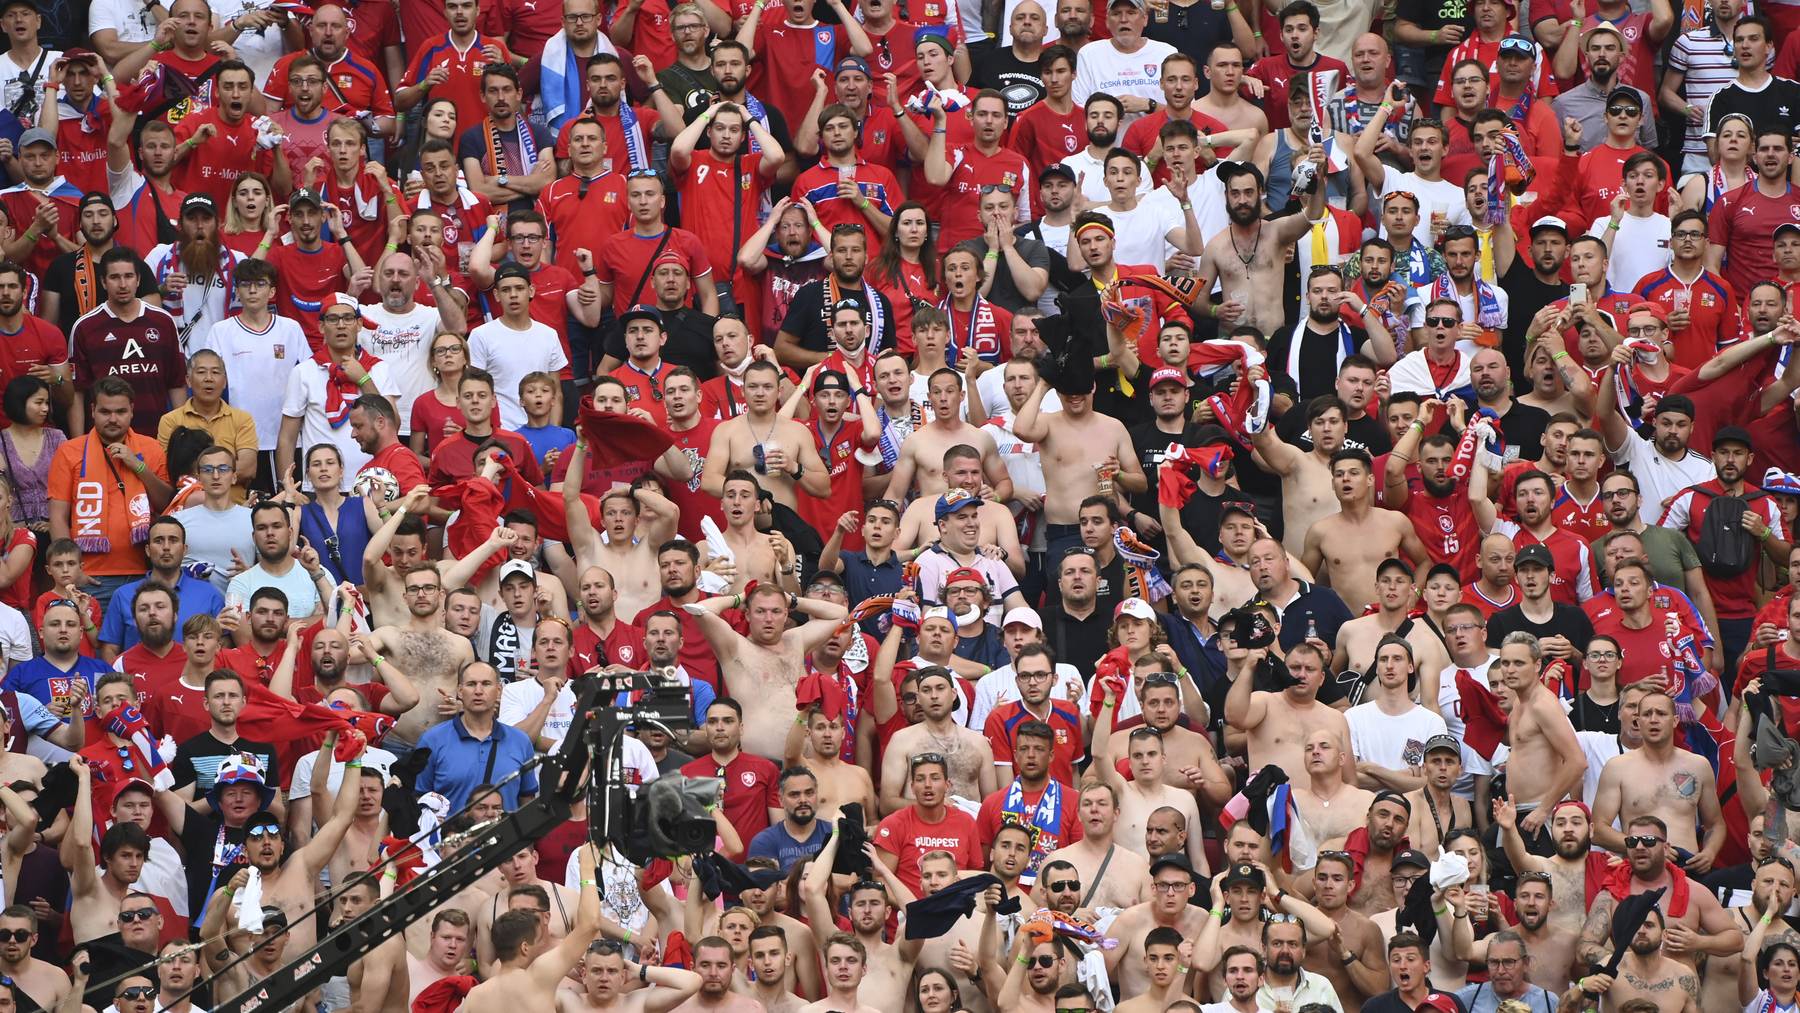 Czech Republic fans inside the stadium during the Euro 2020 soccer championship round of 16 match between the Netherlands and Czech Republic at the Puskas Arena in Budapest, Hungary, Sunday, June 27, 2021. 